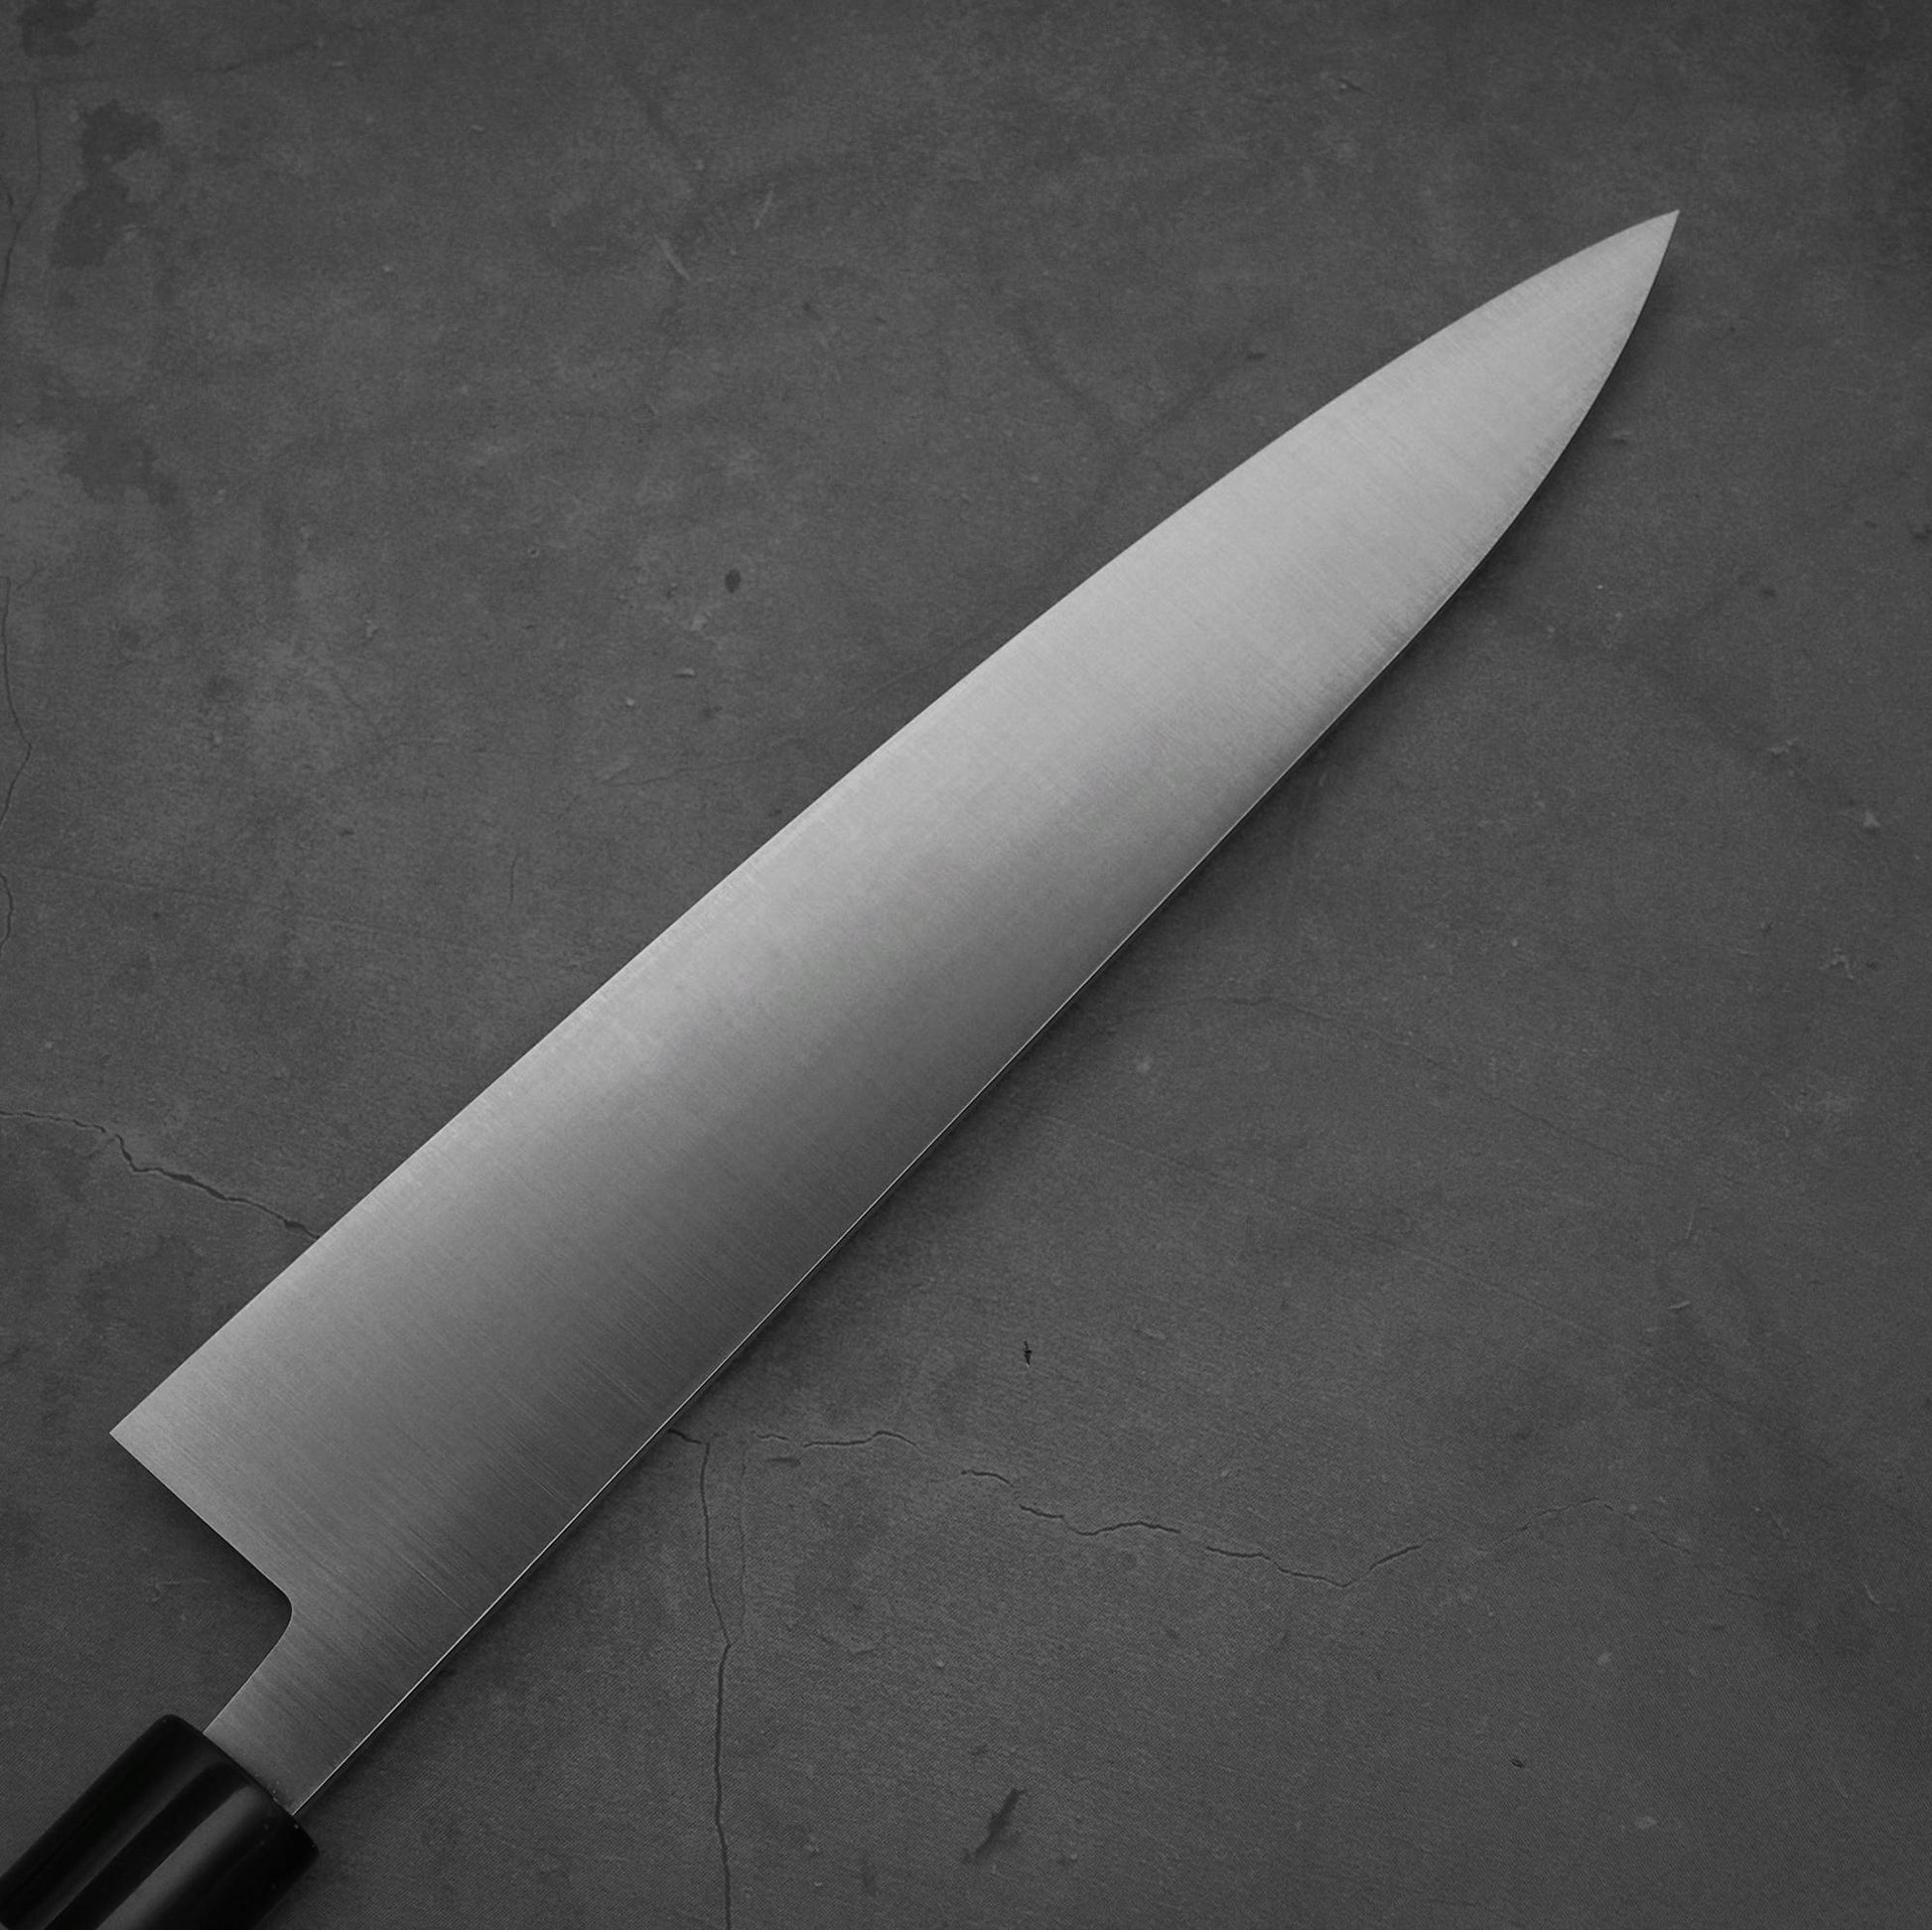 Close up view of the blade of Masamoto KS shirogami#2 gyuto . Image shows left side of the blade